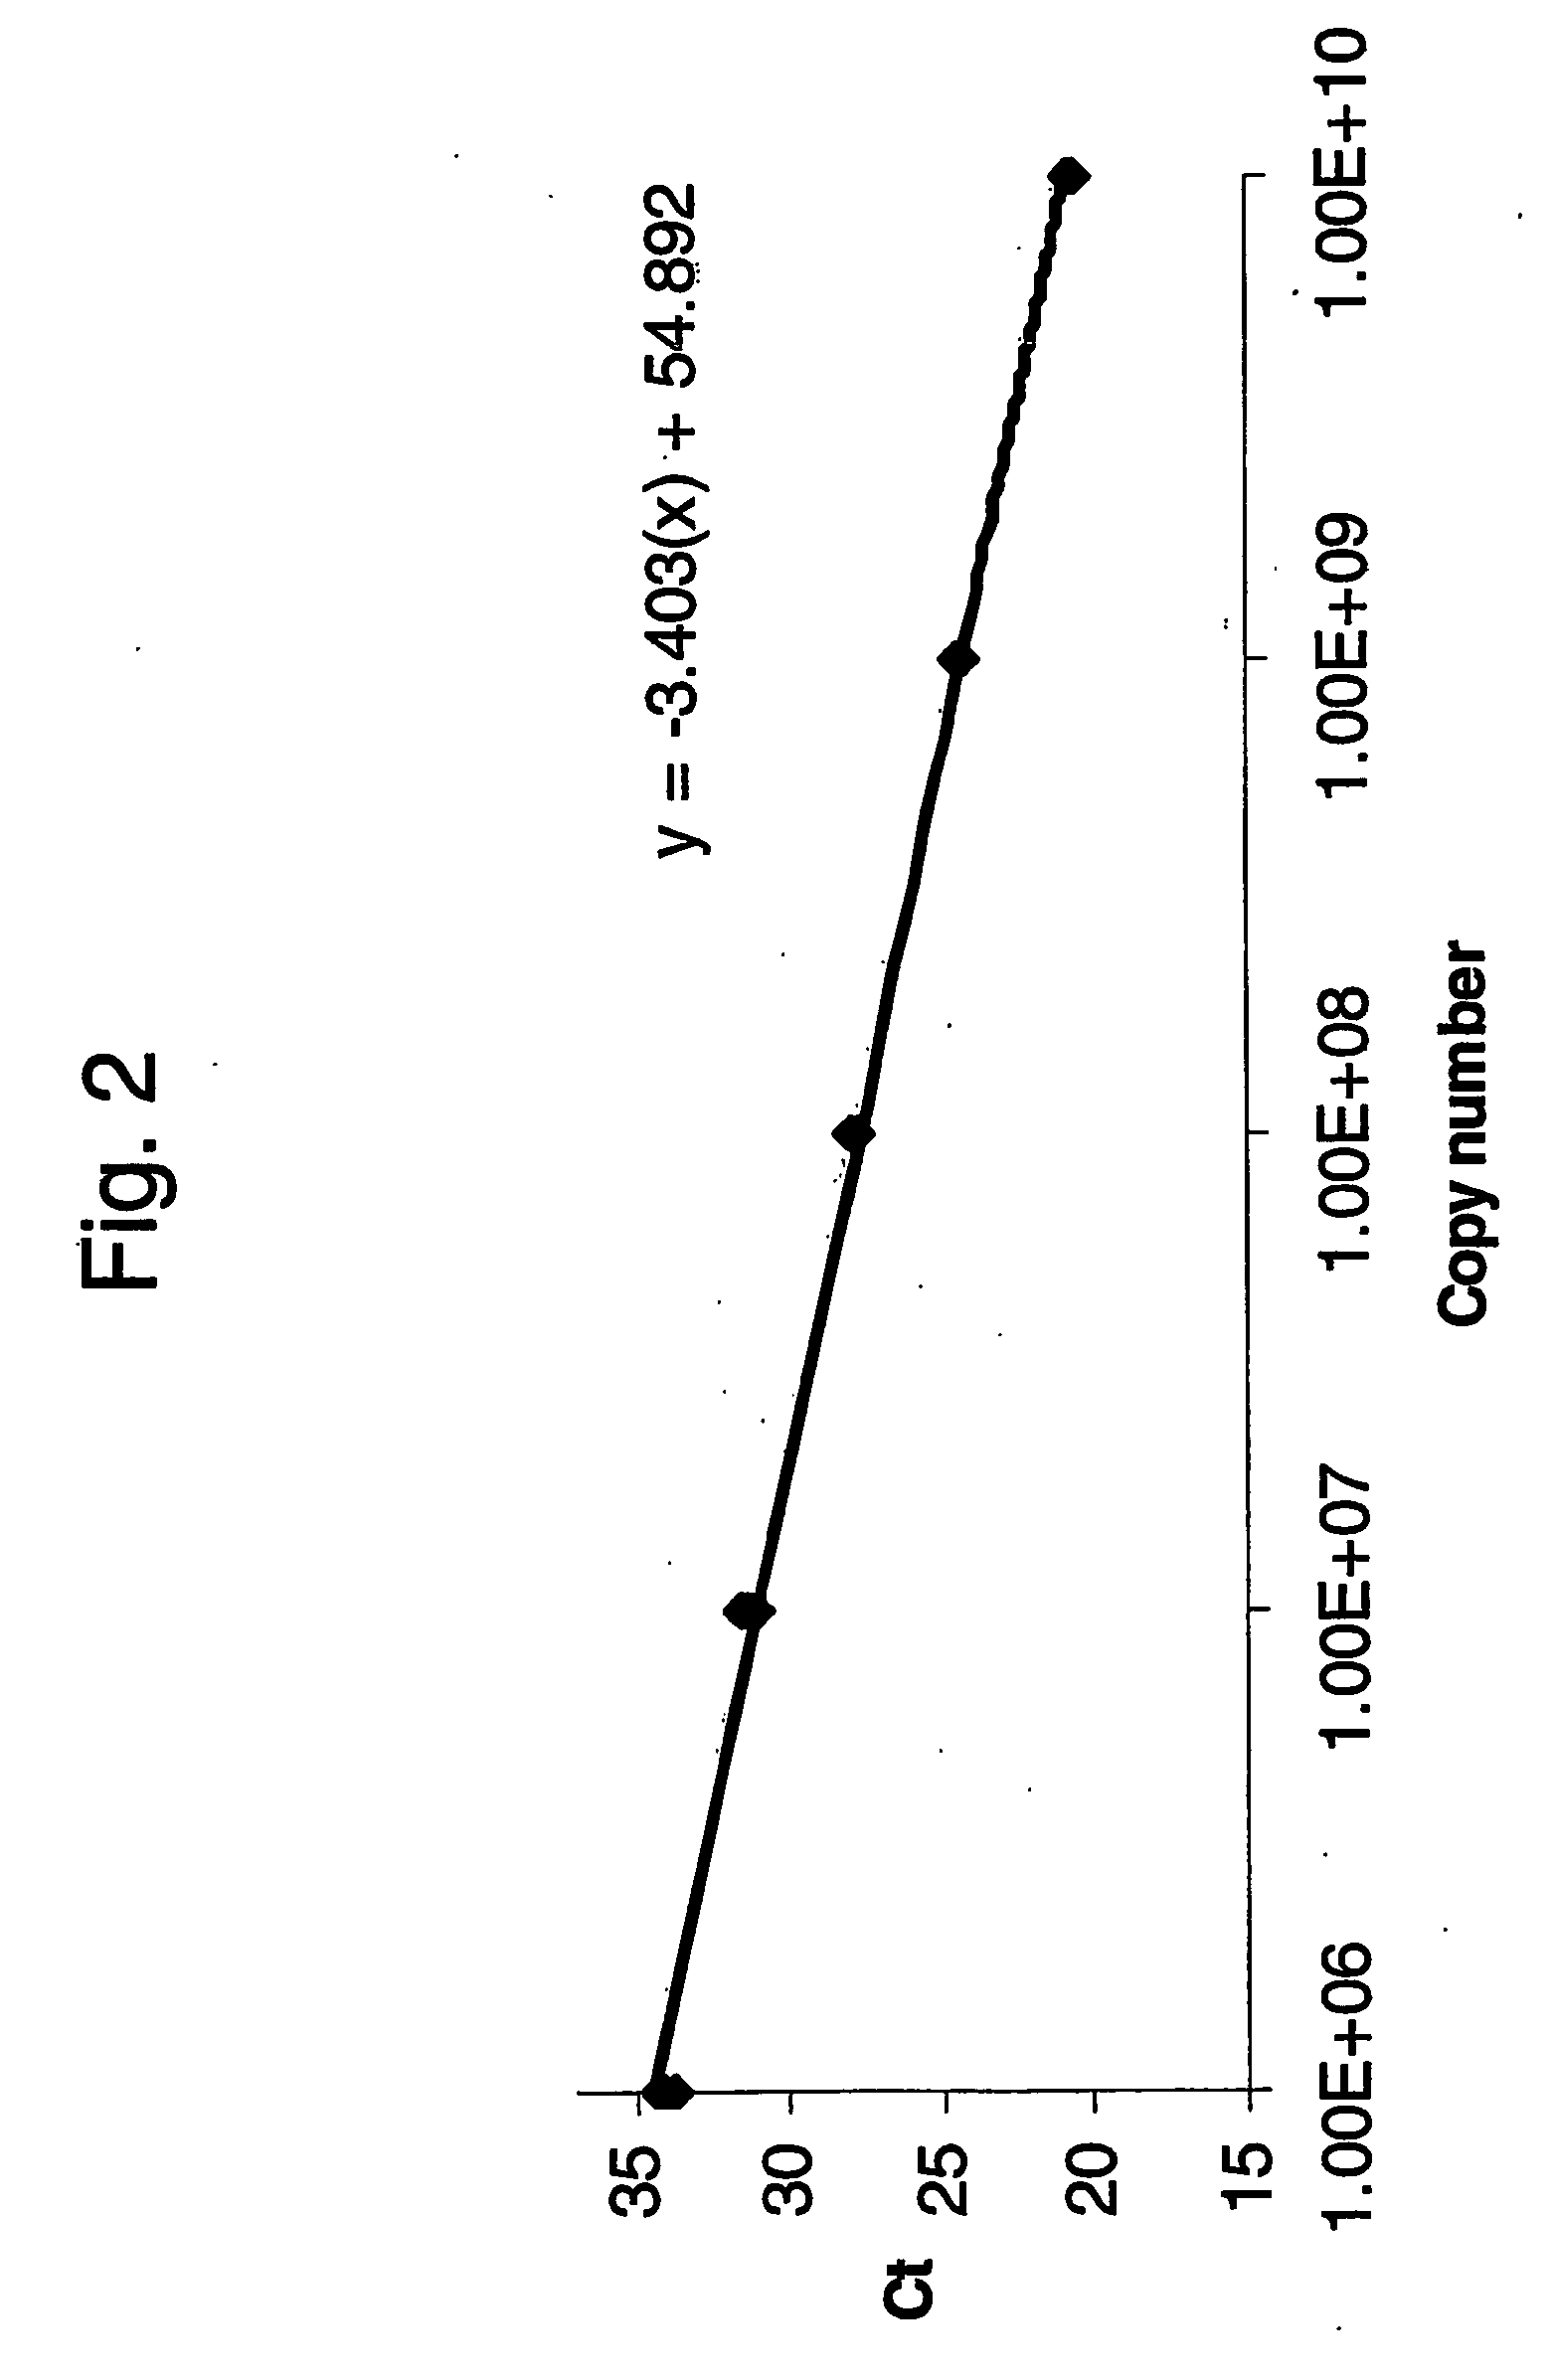 Absolute quantitation of nucleic acids by rt-pcr